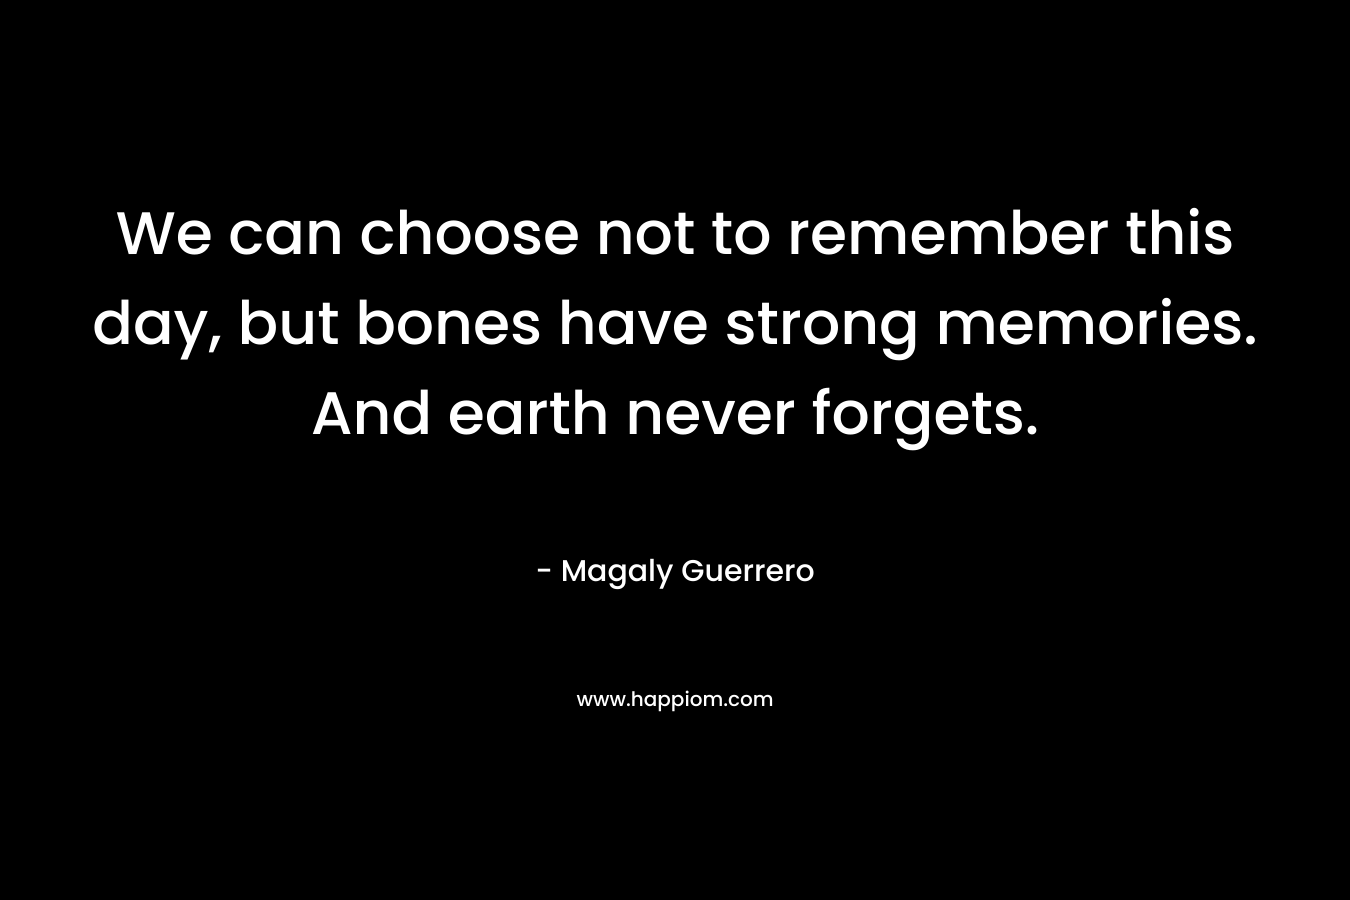 We can choose not to remember this day, but bones have strong memories. And earth never forgets.